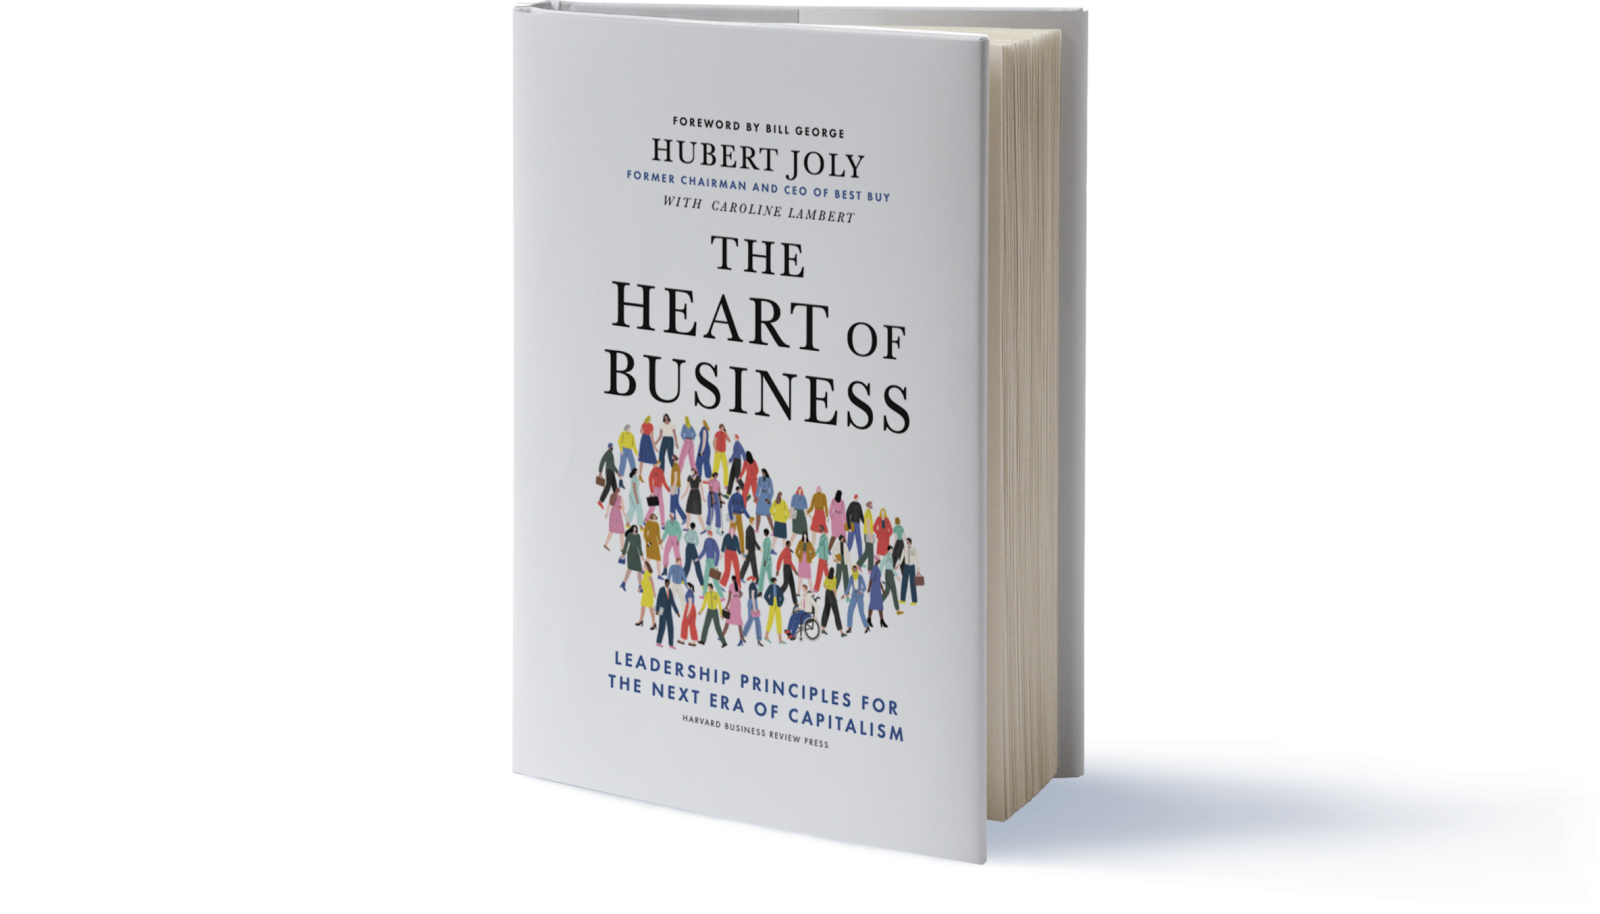 picture of book standing up with title "the heart of business"